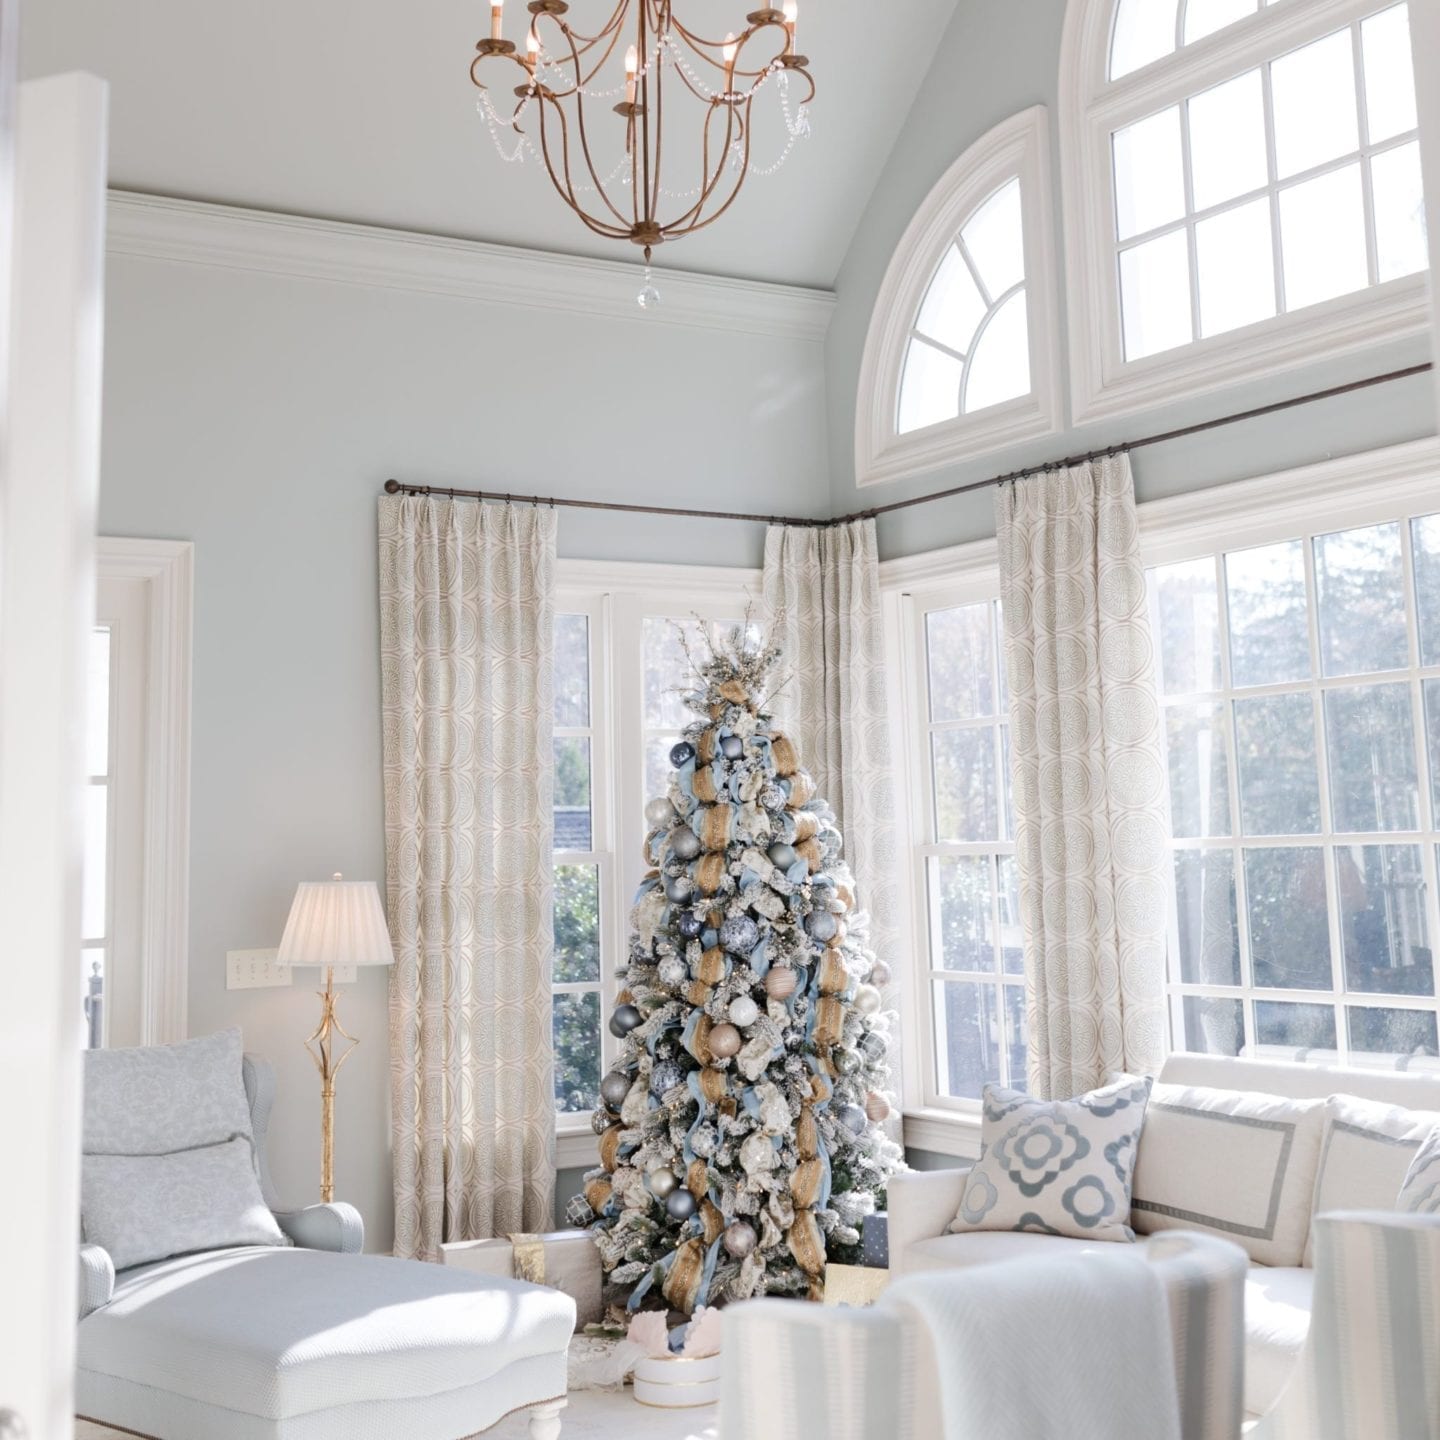 Best light blue paint color for homes. Light blue wall color with Blur Christmas tree.